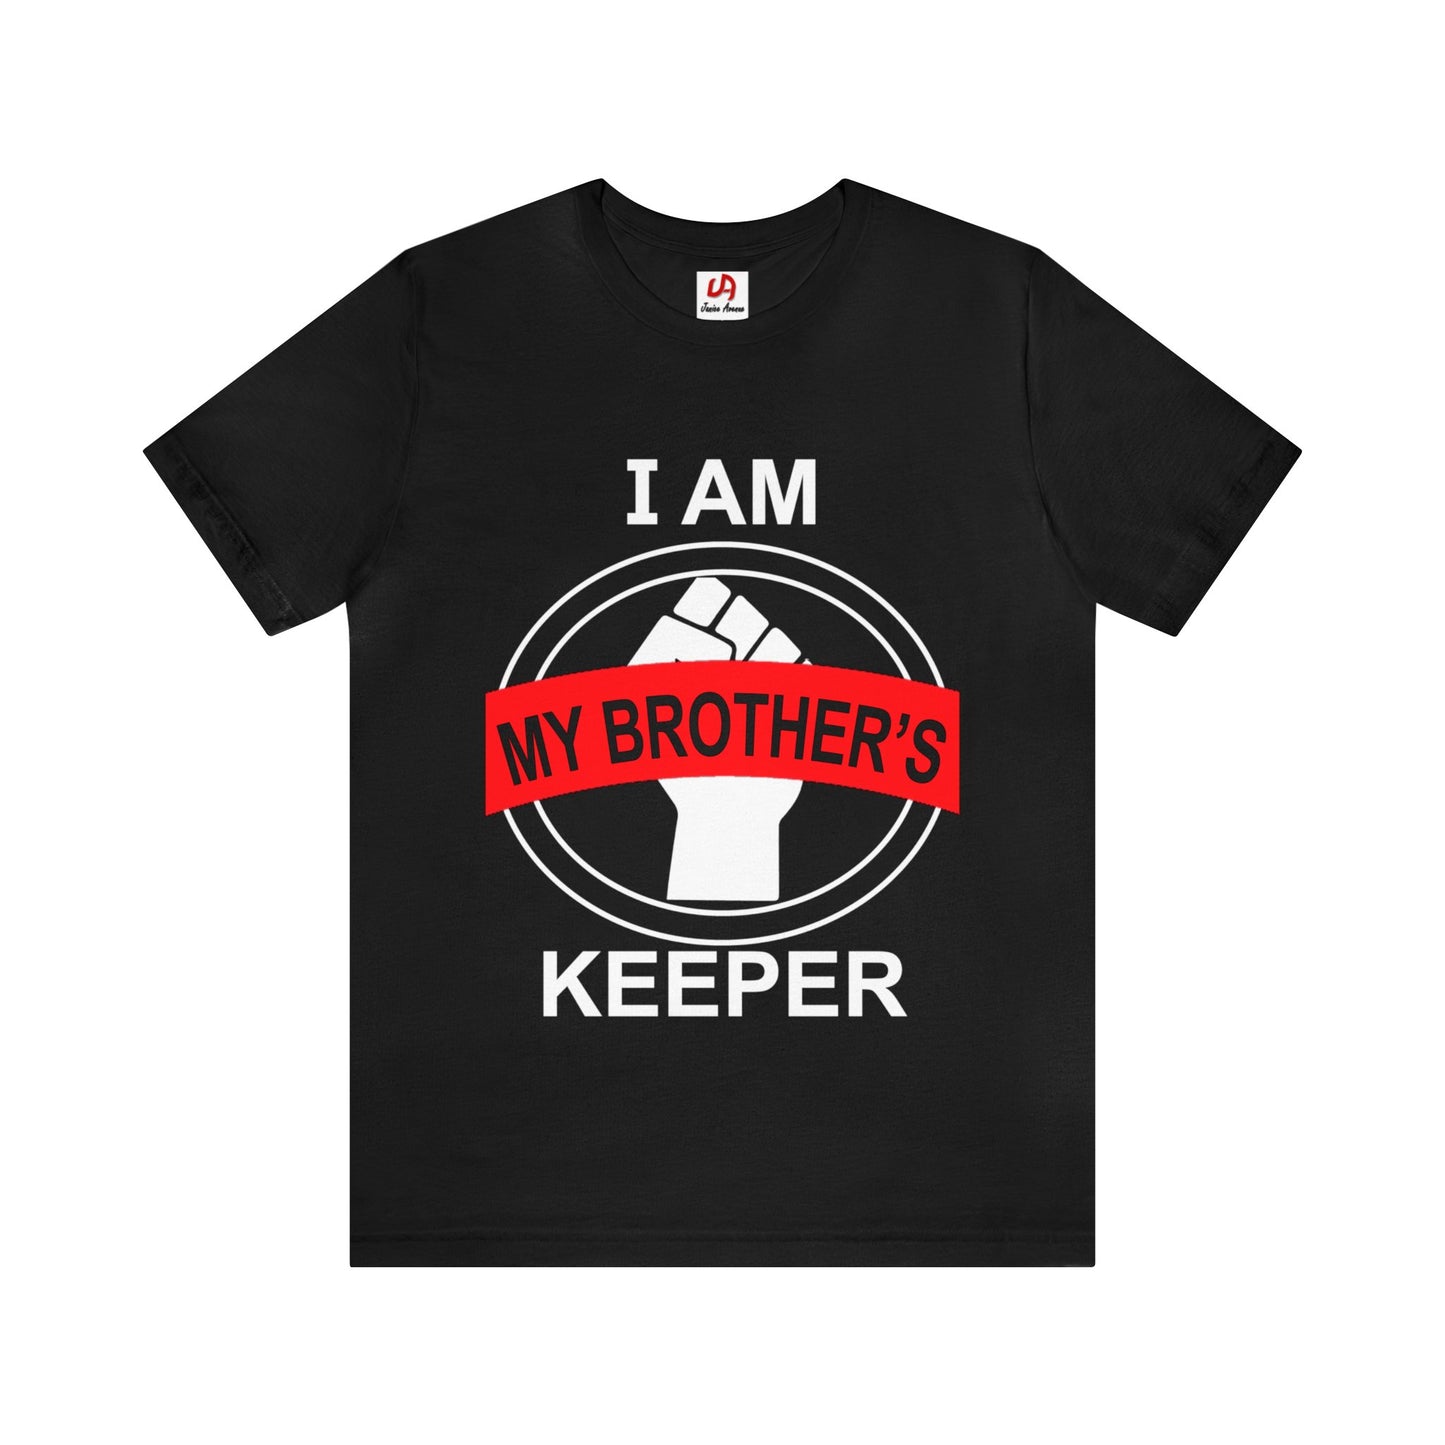 My Brothers Keeper Shirt - White Text